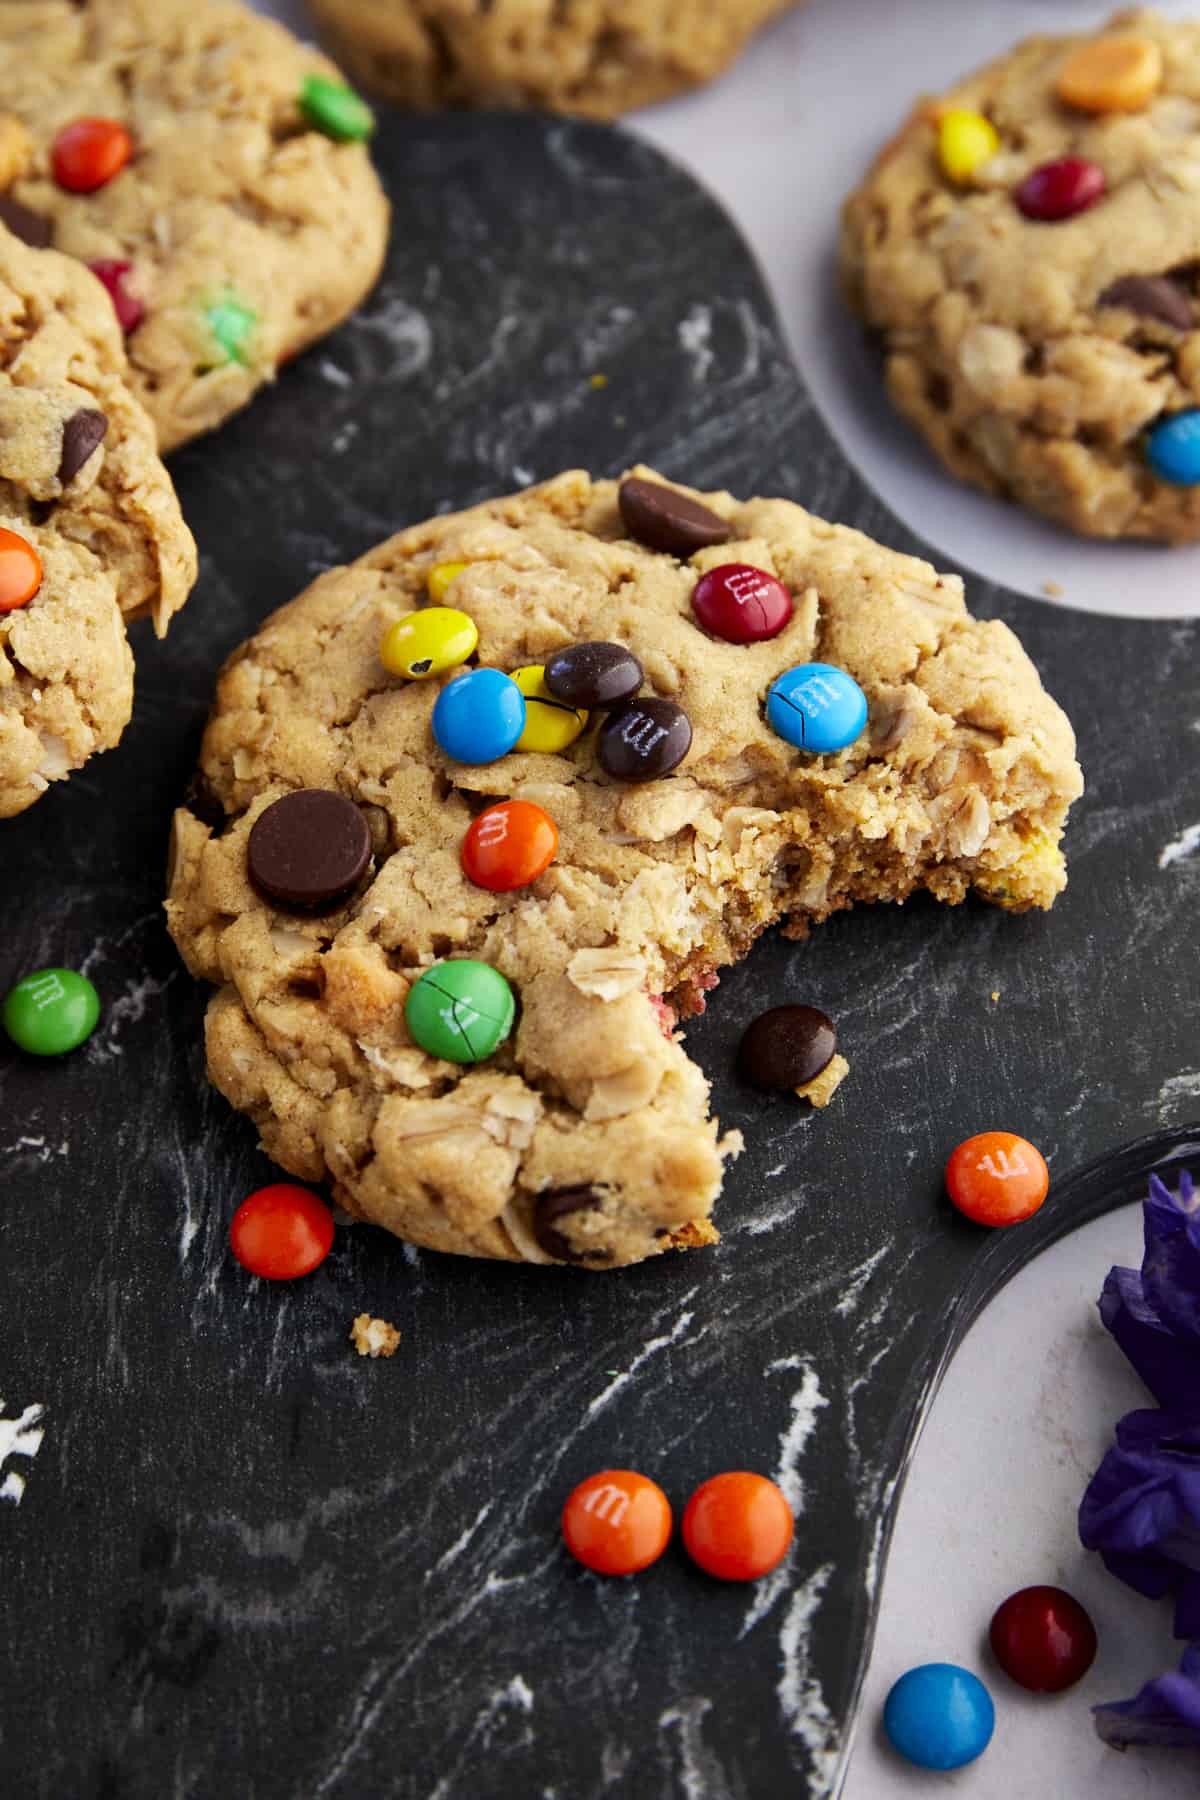 a monster cookie with a bite taken out